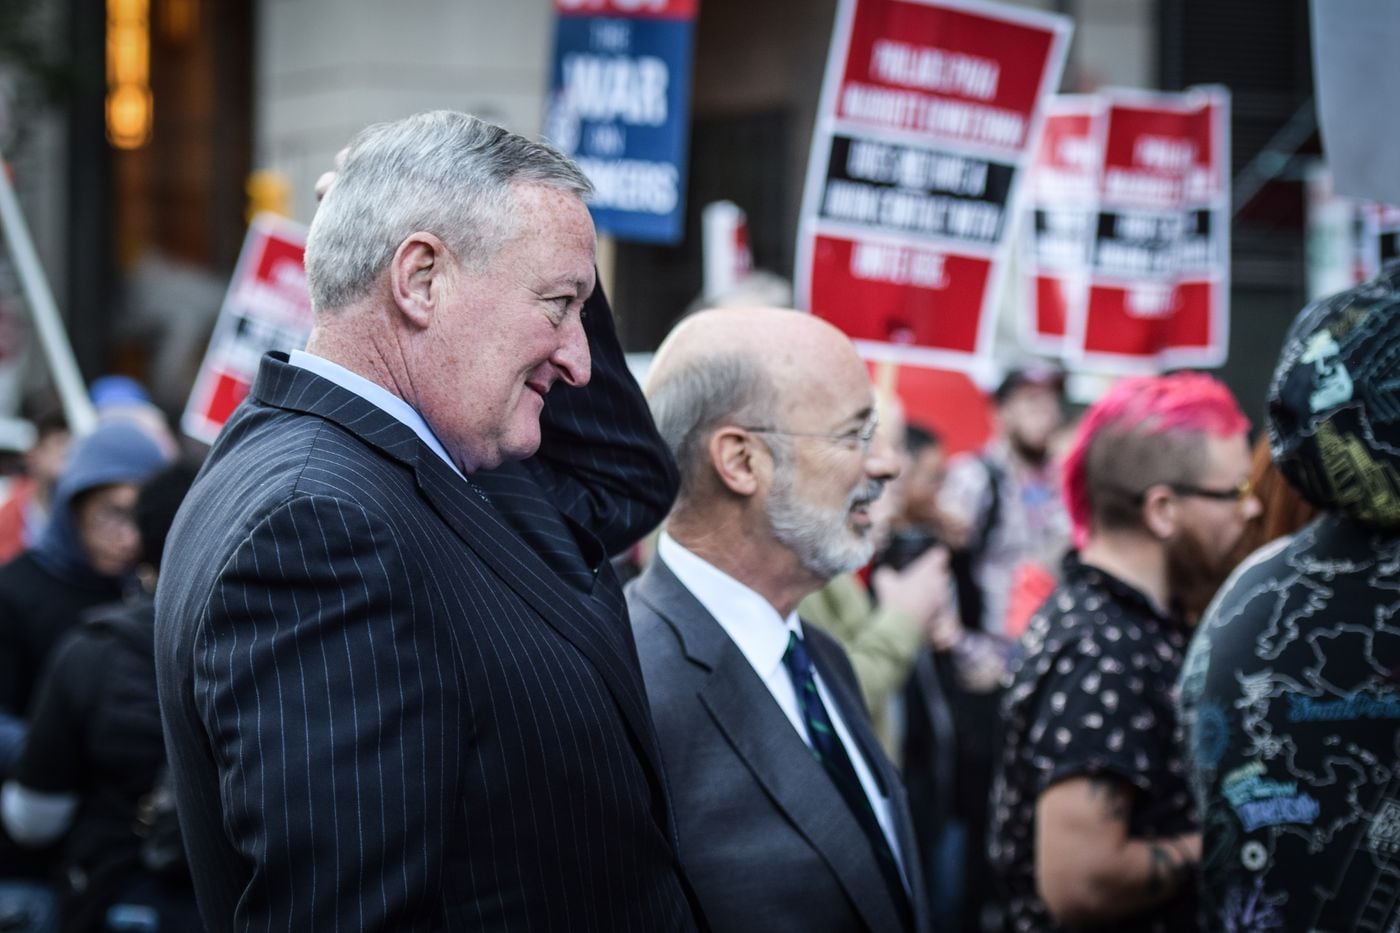 Mayor Kenney (foreground) and Gov. Wolf spoke at a rally for the Philadelphia Marriott Downtown workers who hope to unionize.